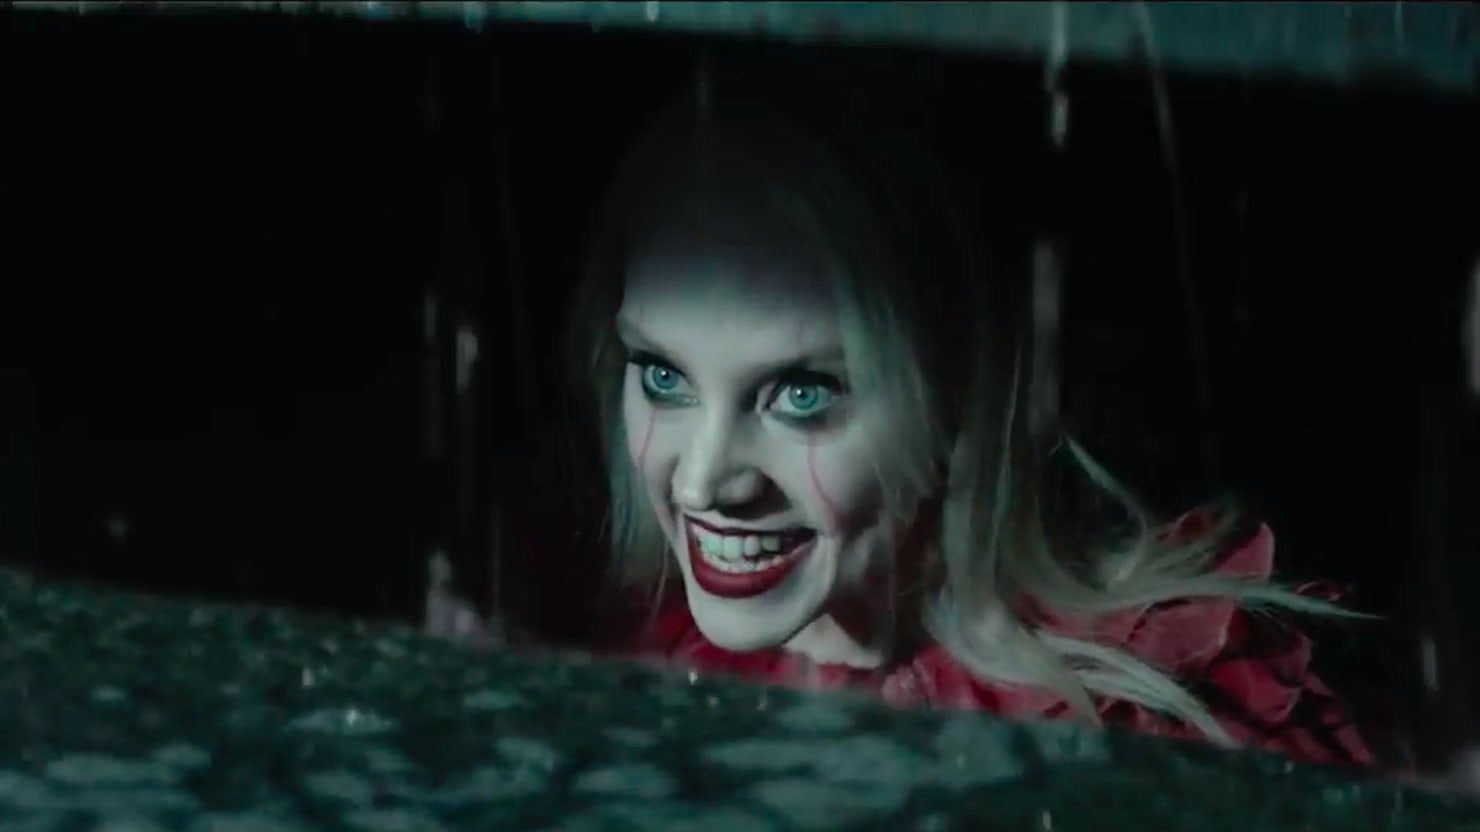 SNL Turns Kellyanne Conway Into the Terrifying Clown from ‘It’